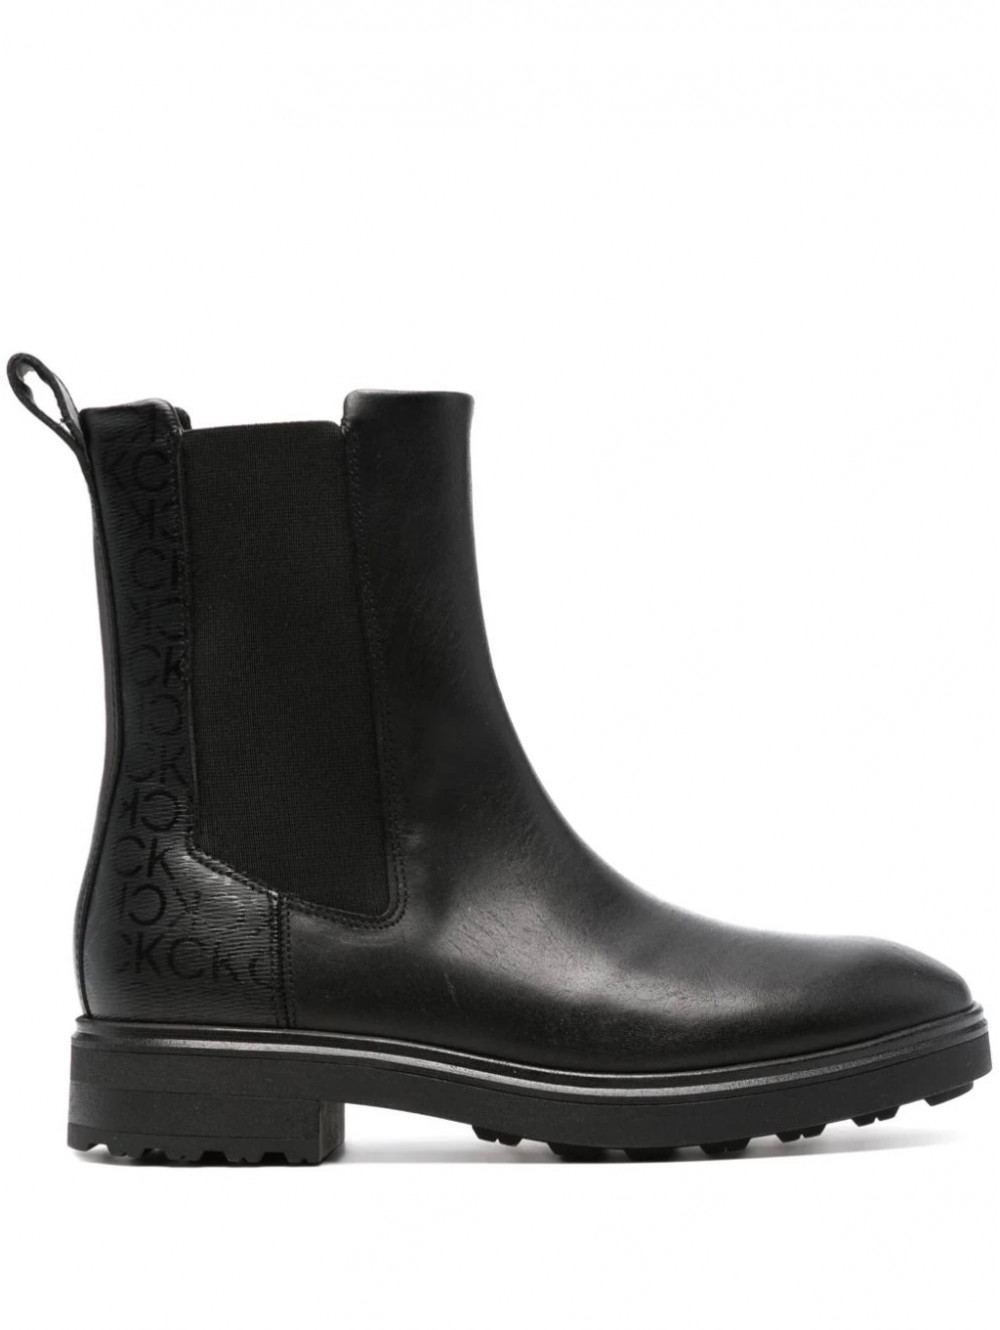 Cleat chelsea boot